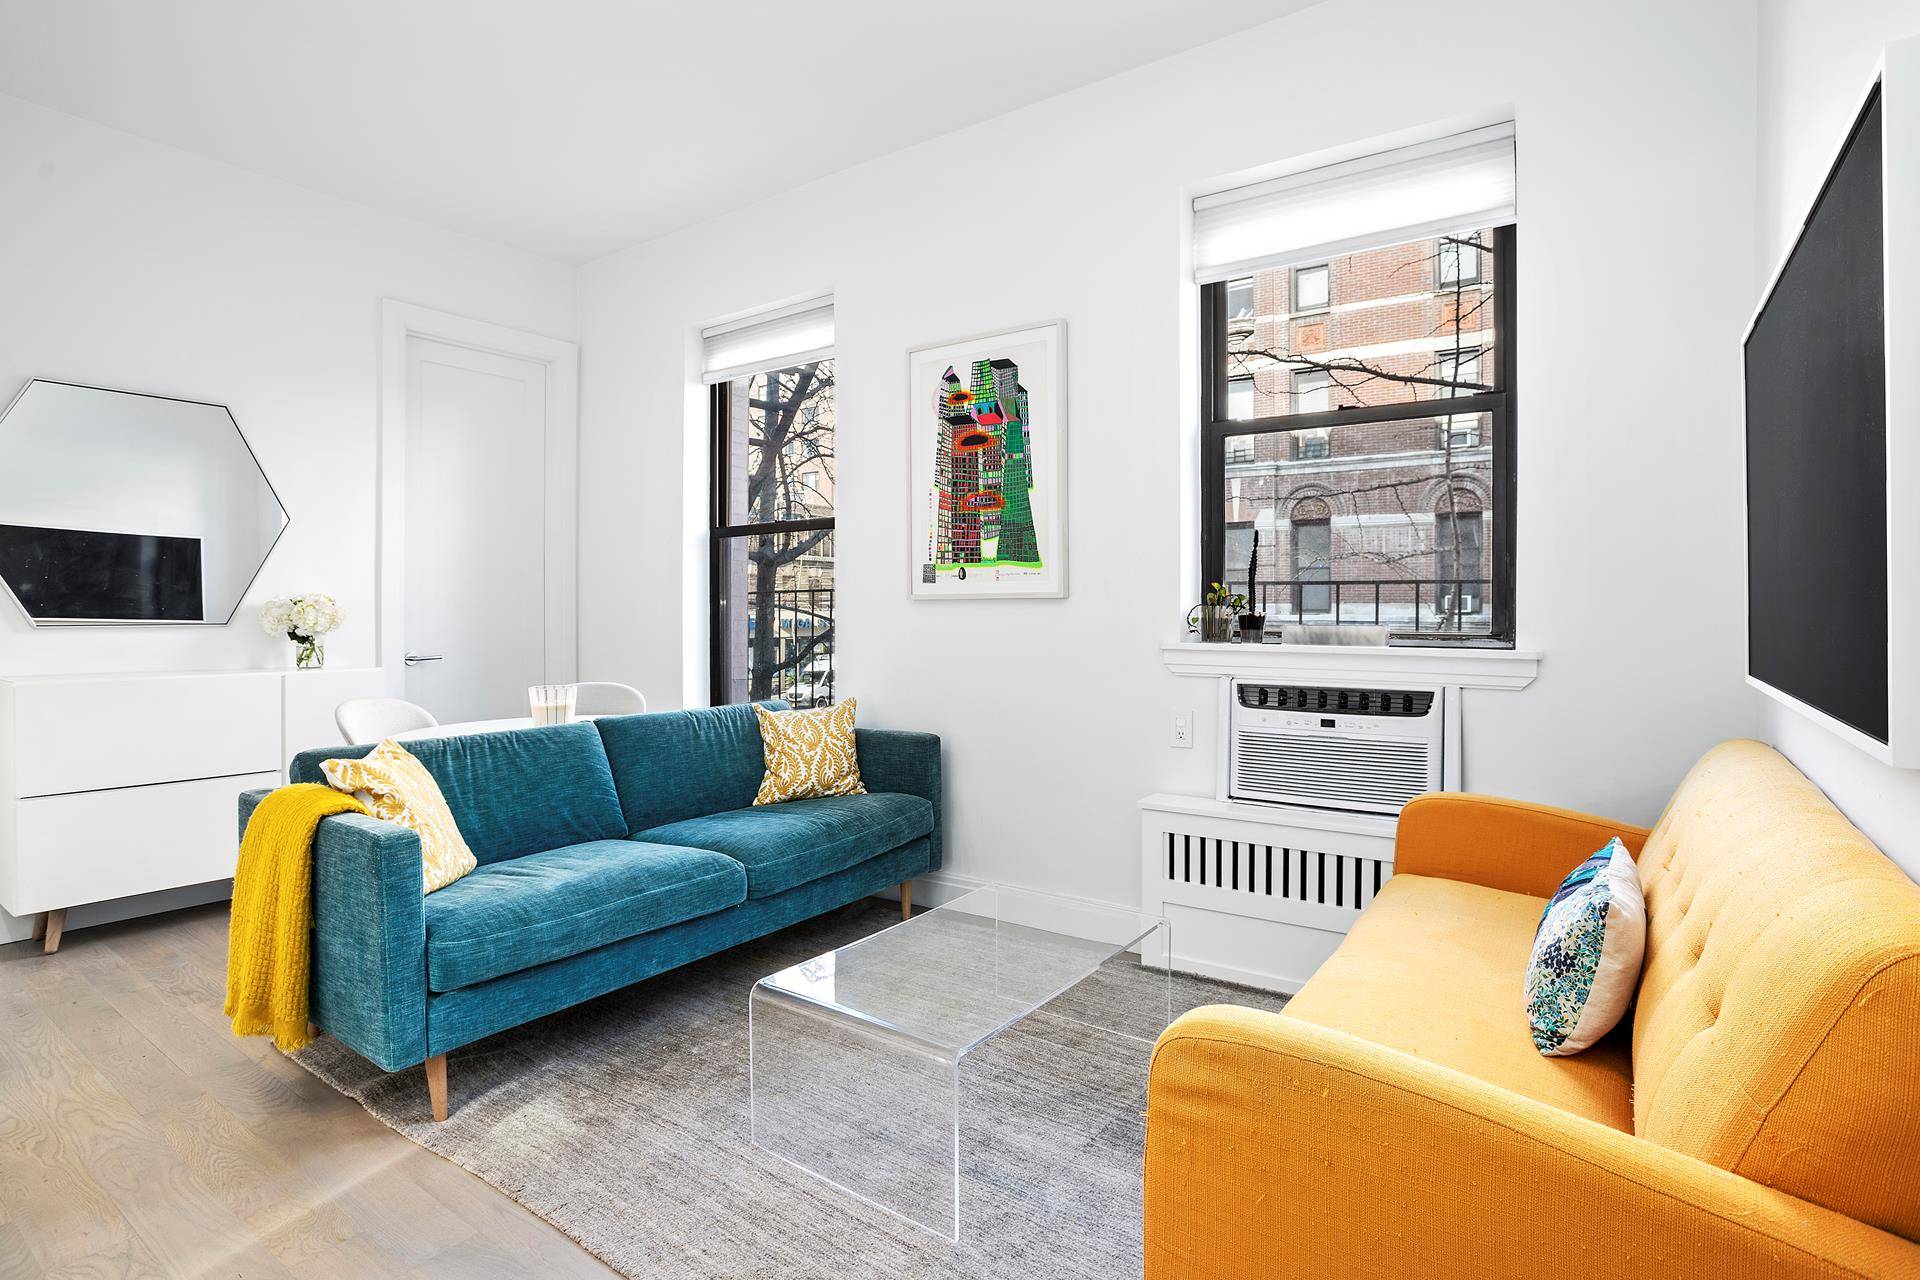 Apartment 2C at 66 West 84th Street is a recently gut renovated 2 bedroom, 1 bathroom boasting bright, north facing exposure, wide plank white oak floors, and ceiling heights of ...